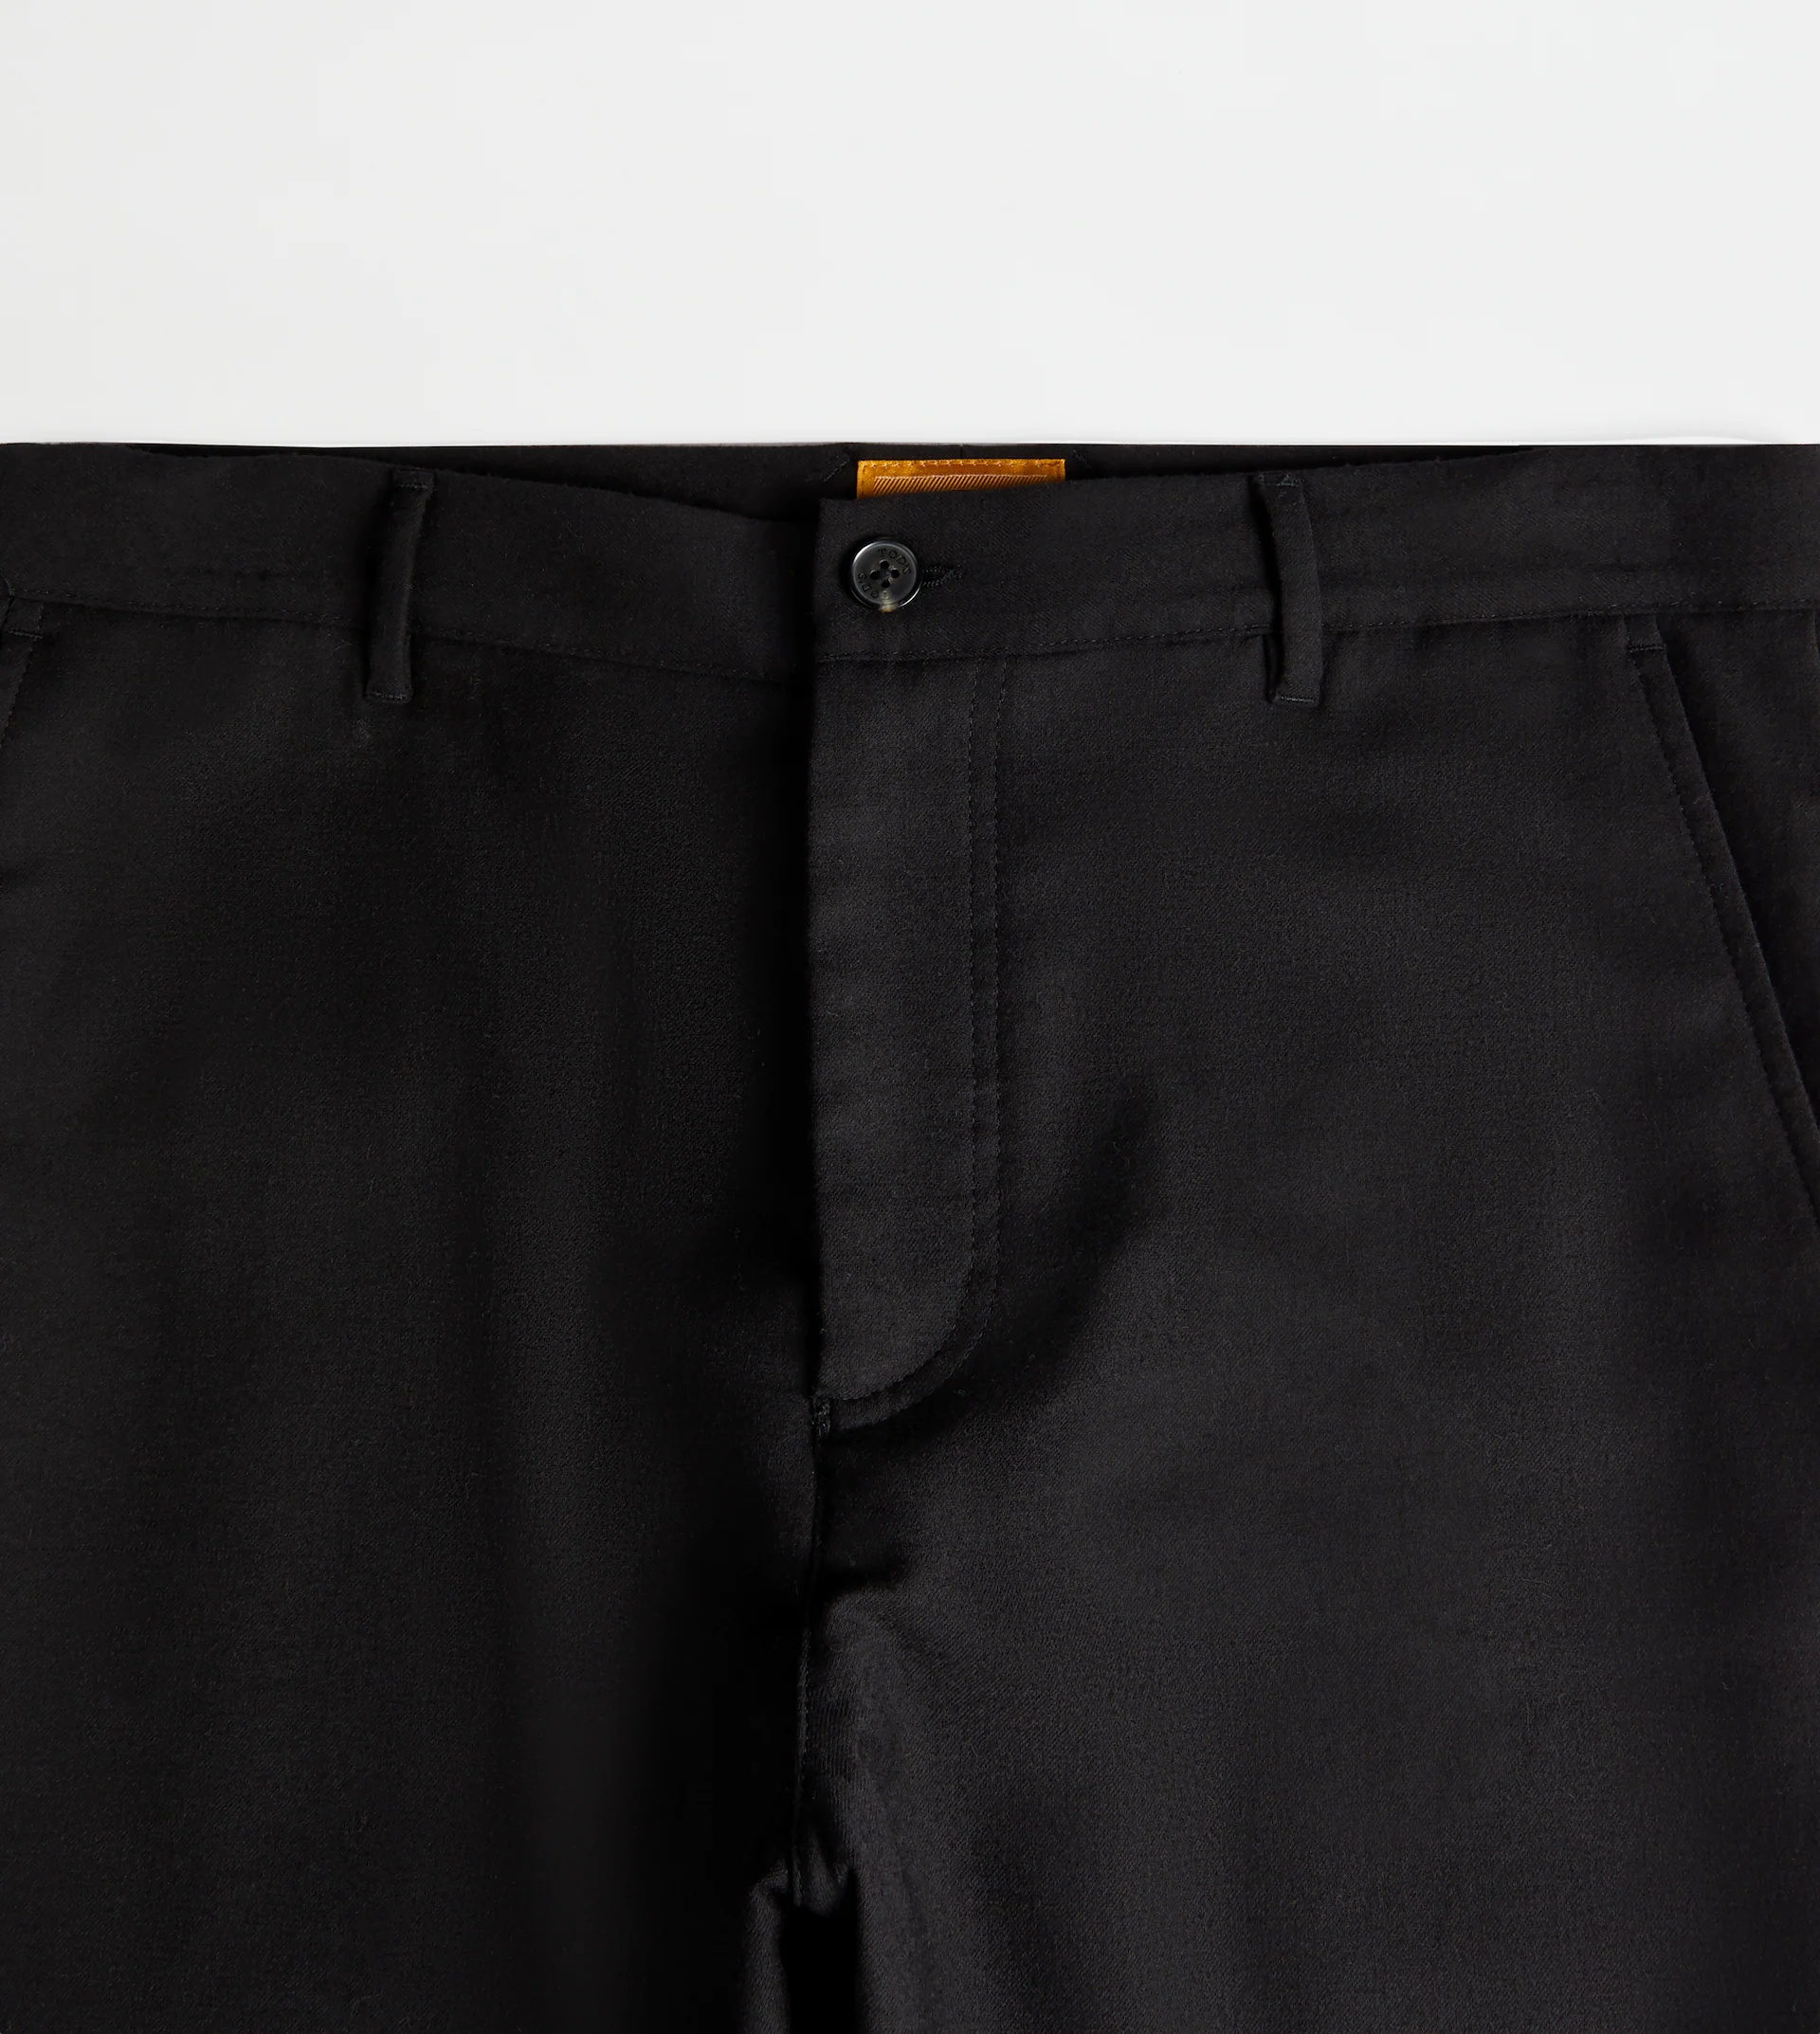 TOD'S CHINO TROUSERS ADJUSTABLE WAISTBAND - BLACK - 6